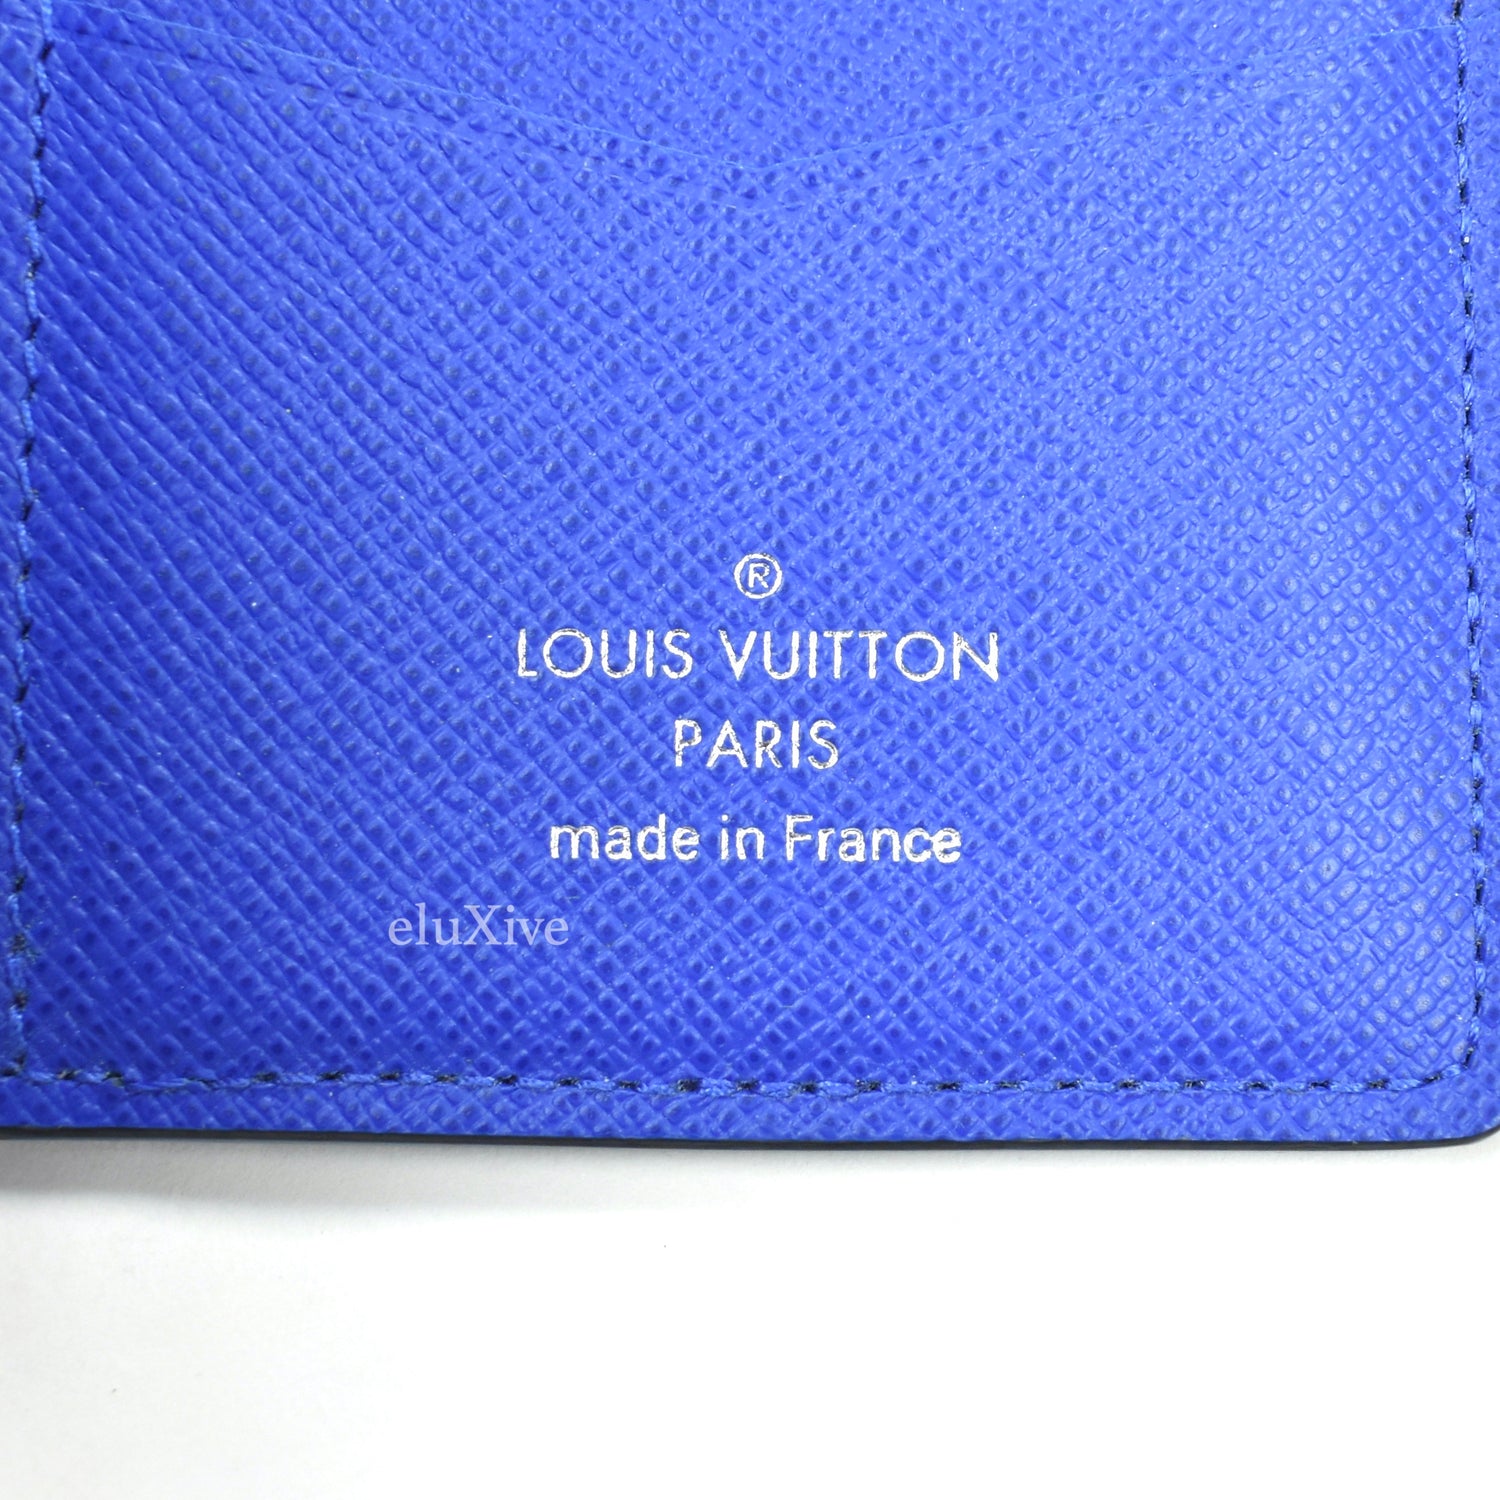 His and hers pocket organizers : r/Louisvuitton